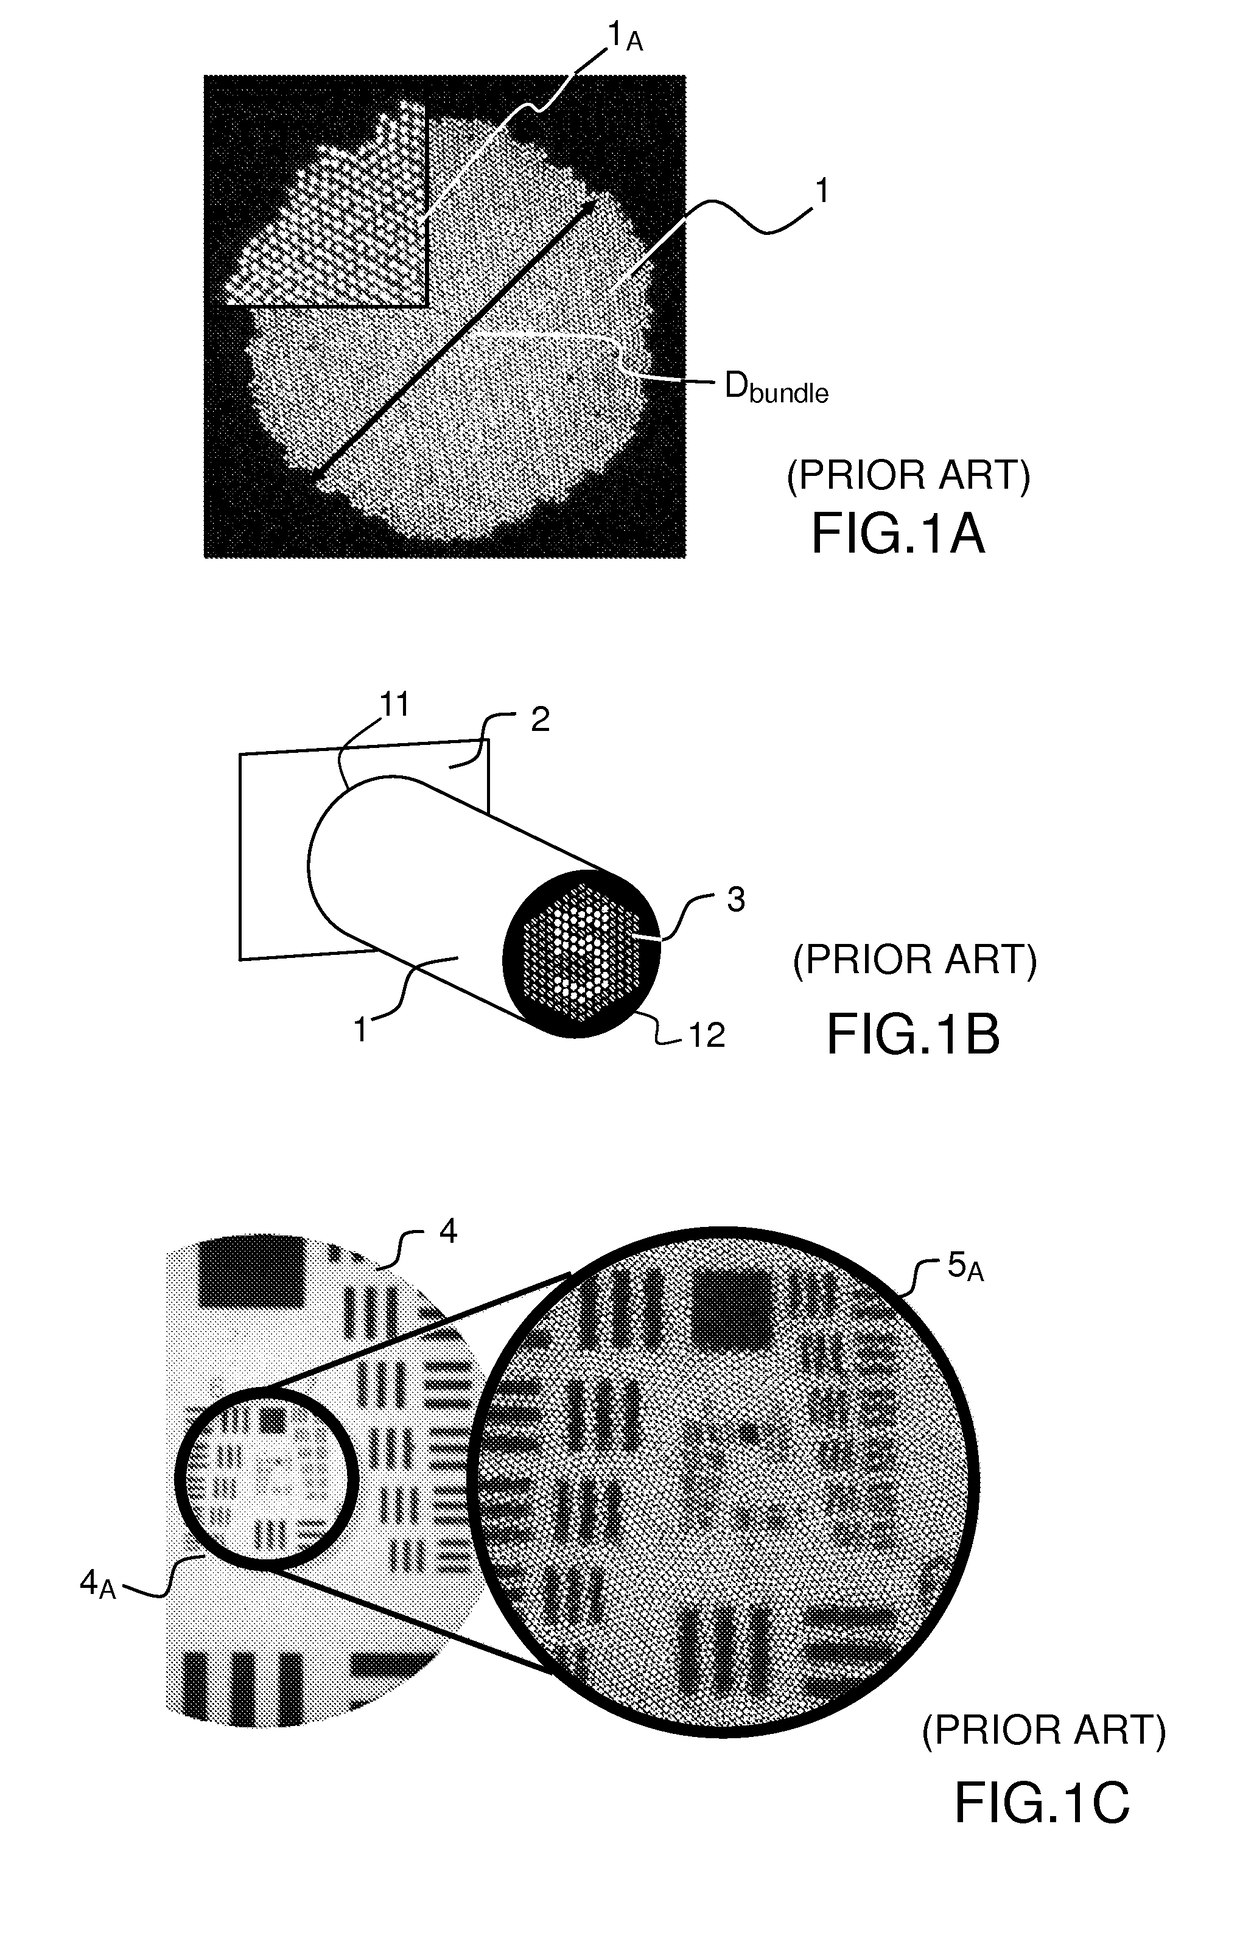 Systems and methods for high resolution imaging using a bundle of optical fibers